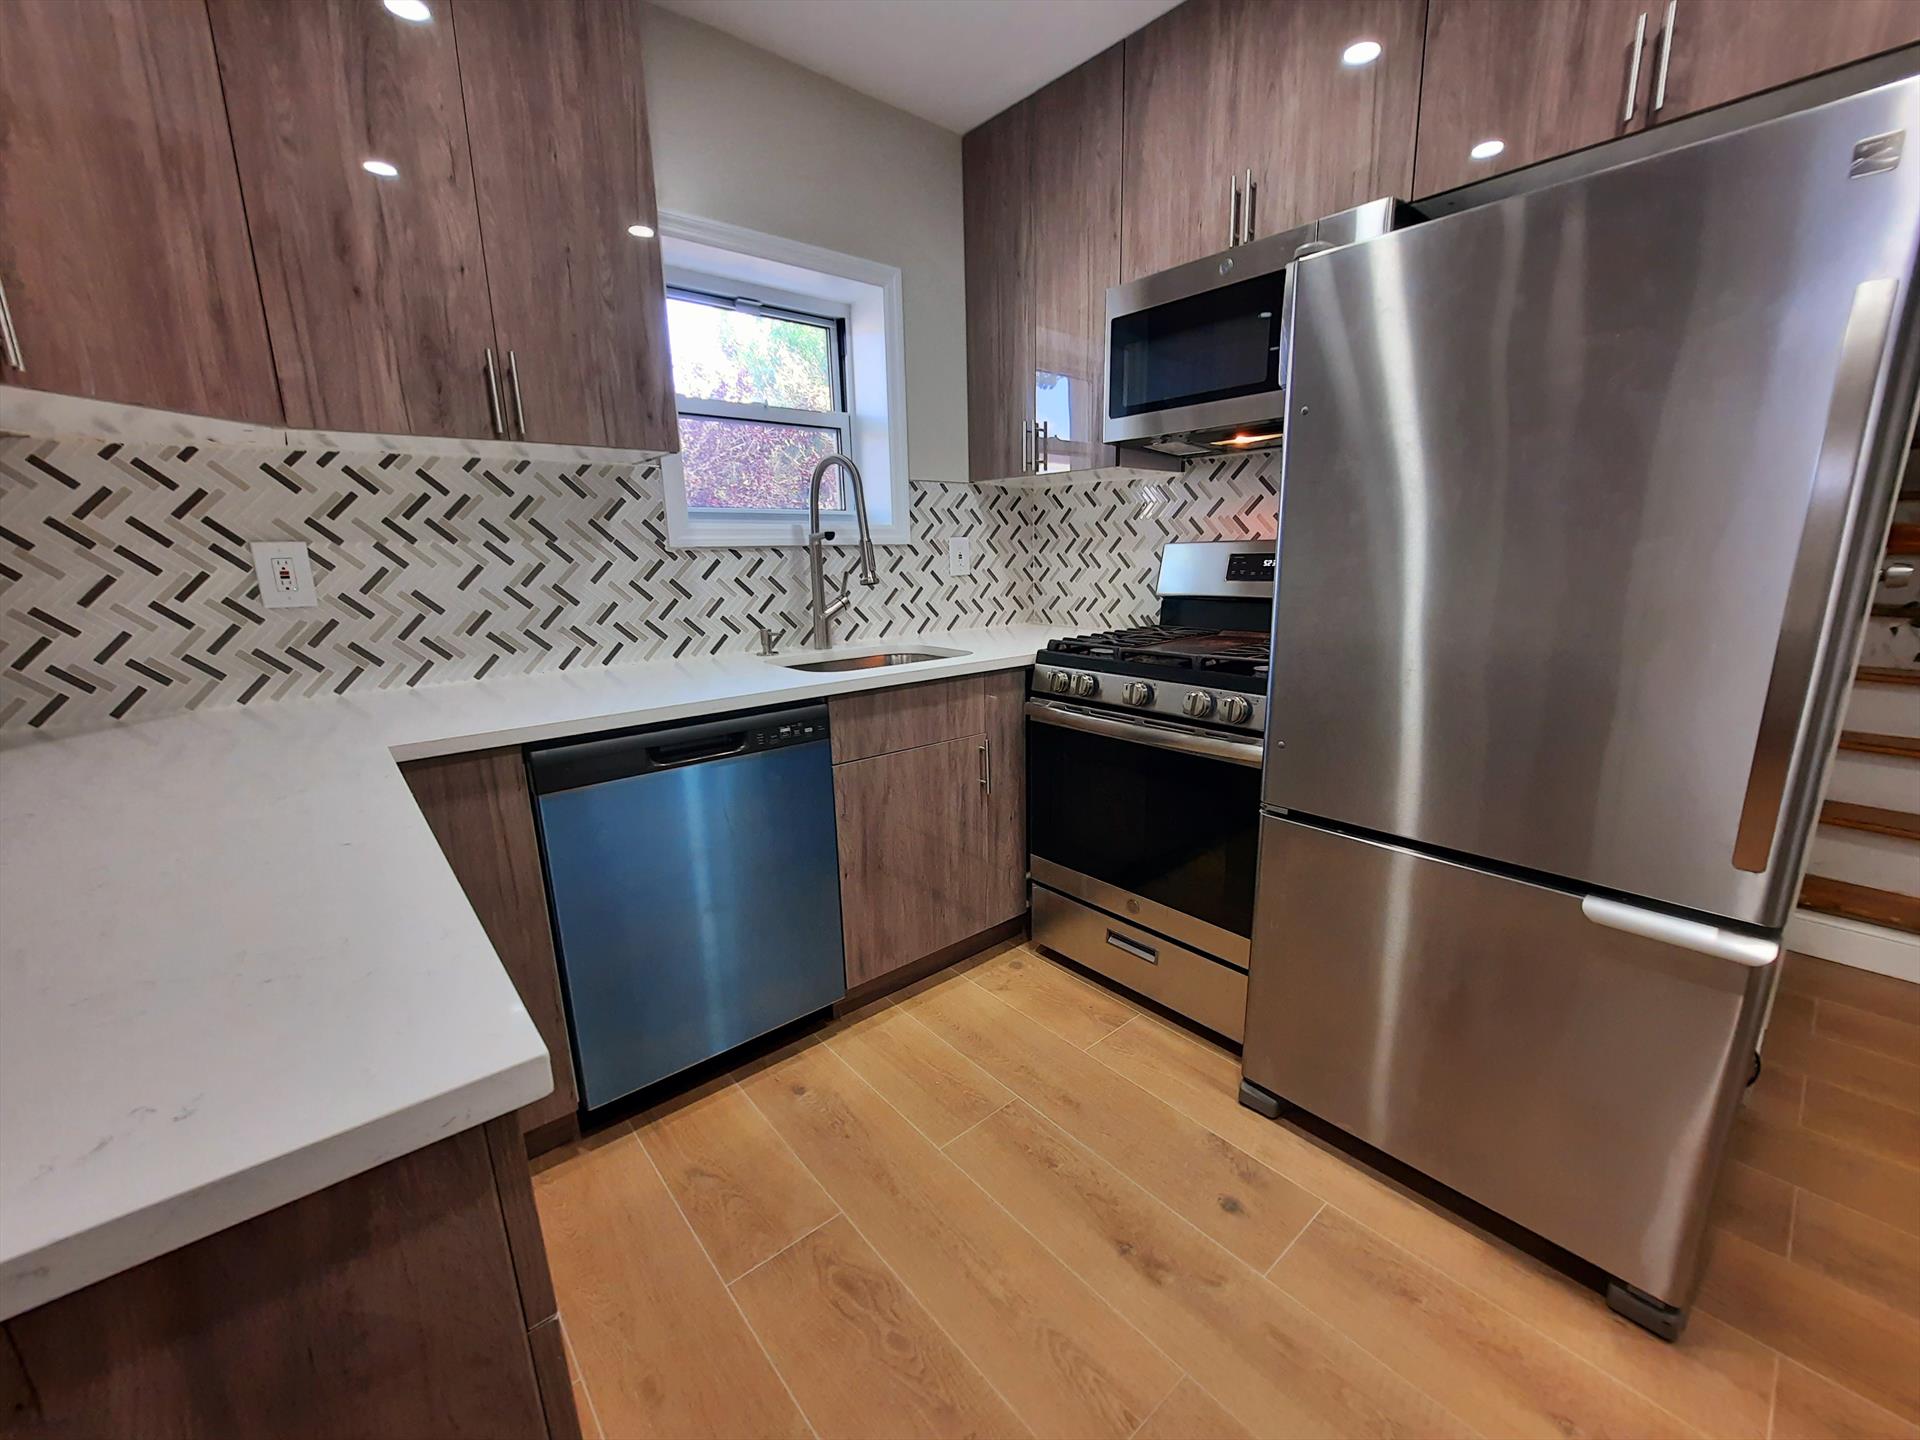 Move into this lovely North Bergen 1 bedroom rental located at 9107 Columbia Avenue. Features: private entrance, newly renovated kitchen with stainless steel refrigerator, gas stove, dishwasher, and microwave, modern bathroom with tub, living room area (10.5 ' x 9'), bedroom with large closet (16' x 10.5'), separate den / office / storage (7' x 7' - no window), ALL UTILITIES INCLUDED!, close to Tonnelle Avenue business district with lots of shopping and restaurants and public transportation, NO PETS. Available ASAP! To make this lovely apartment yours: $1700 (1st months rent), $2550 (security deposit), $1700 (broker fee), $50 (credit check per adult).